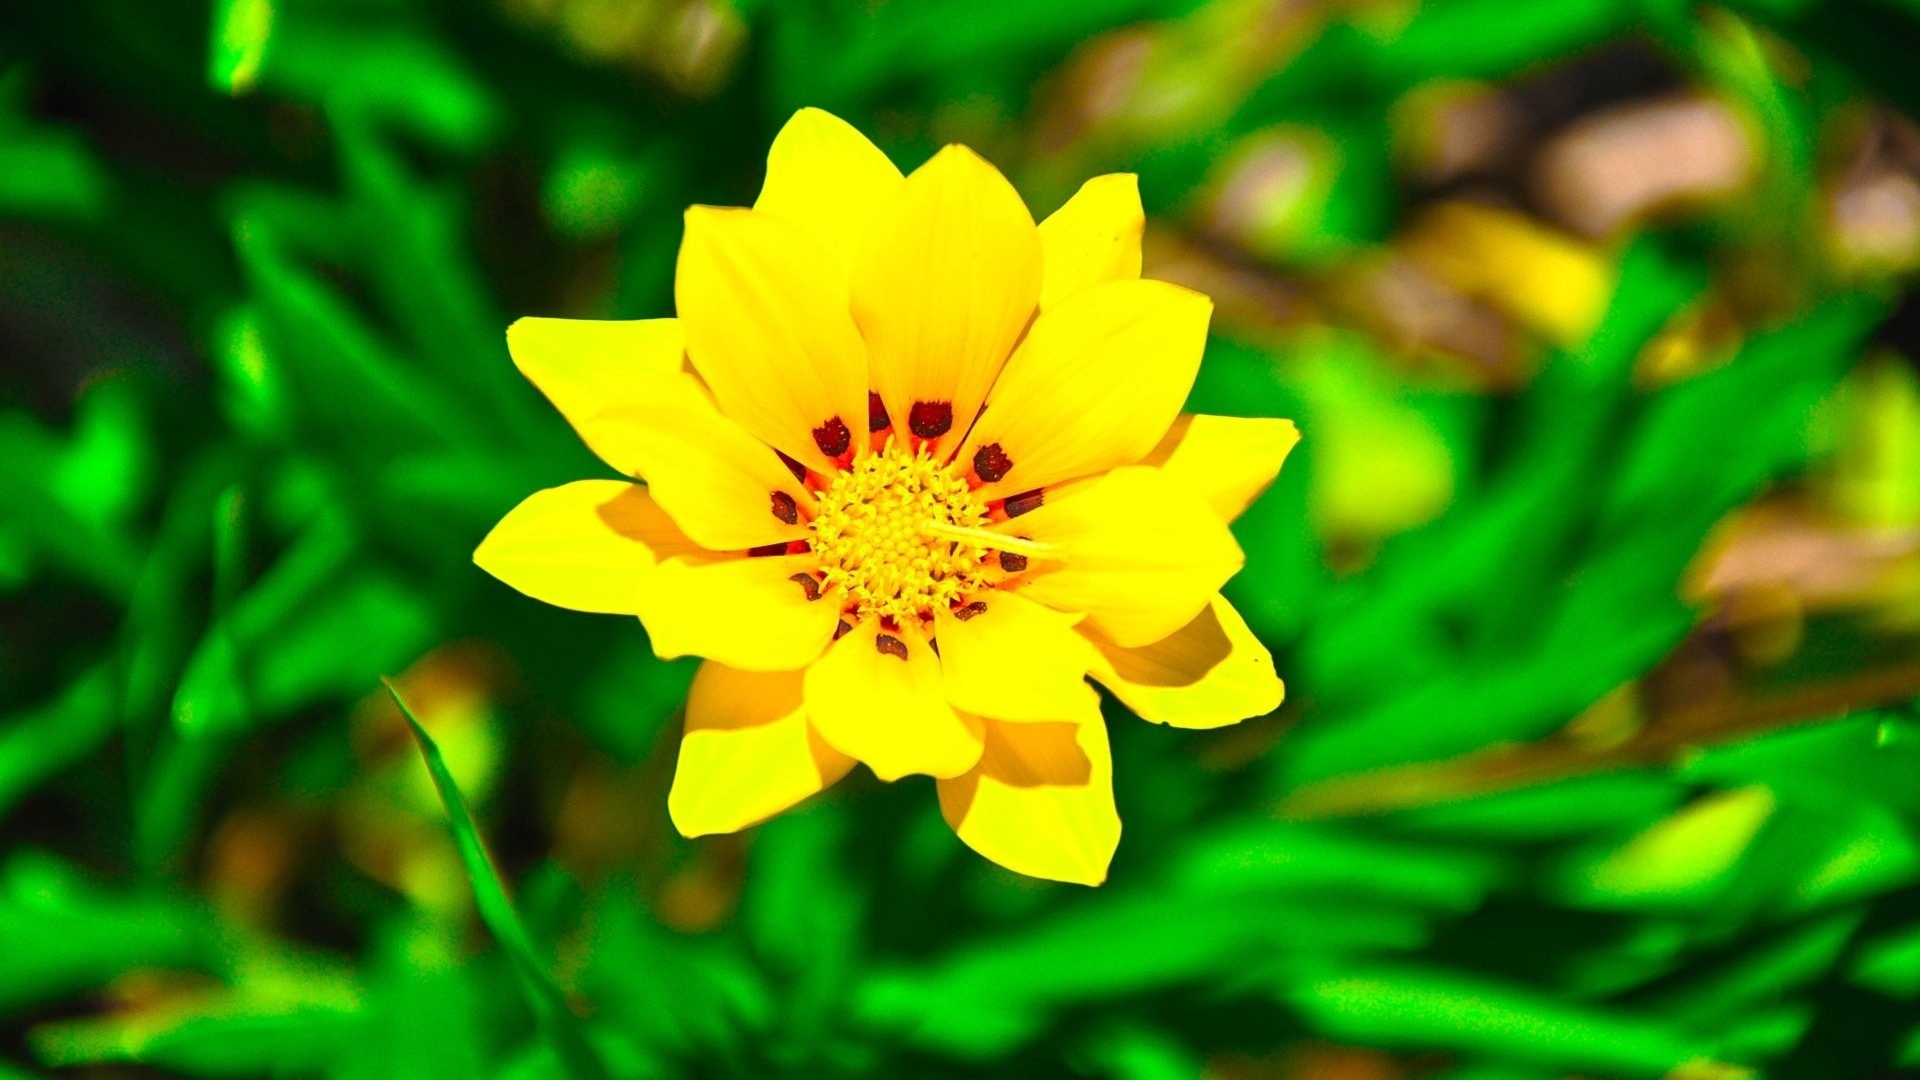 HD Yellow Flower Best Flowers Photos Image And Wallpaper